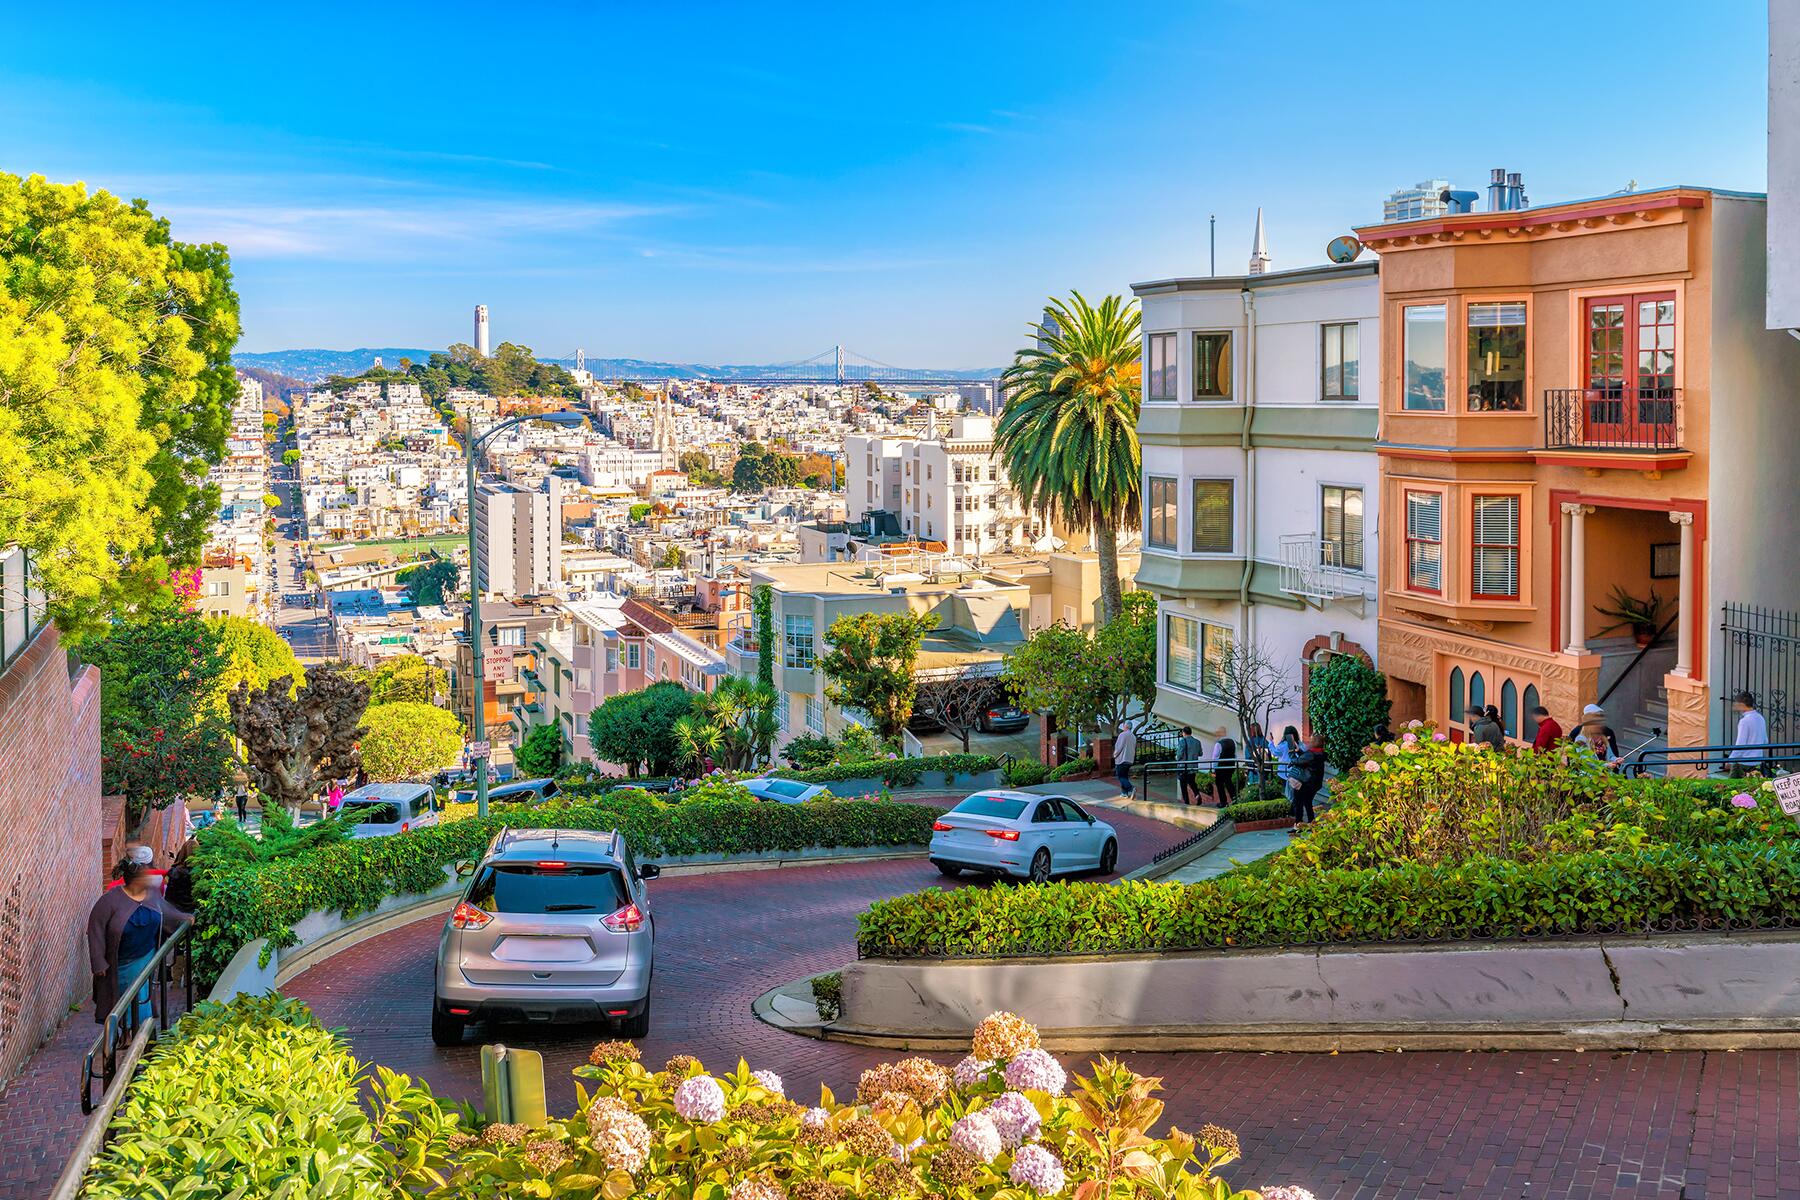 <a href='https://www.fodors.com/world/north-america/usa/california/san-francisco/experiences/news/photos/25-ultimate-things-to-do-in-san-francisco#'>From &quot;30 Ultimate Things to Do in San Francisco&quot;</a>